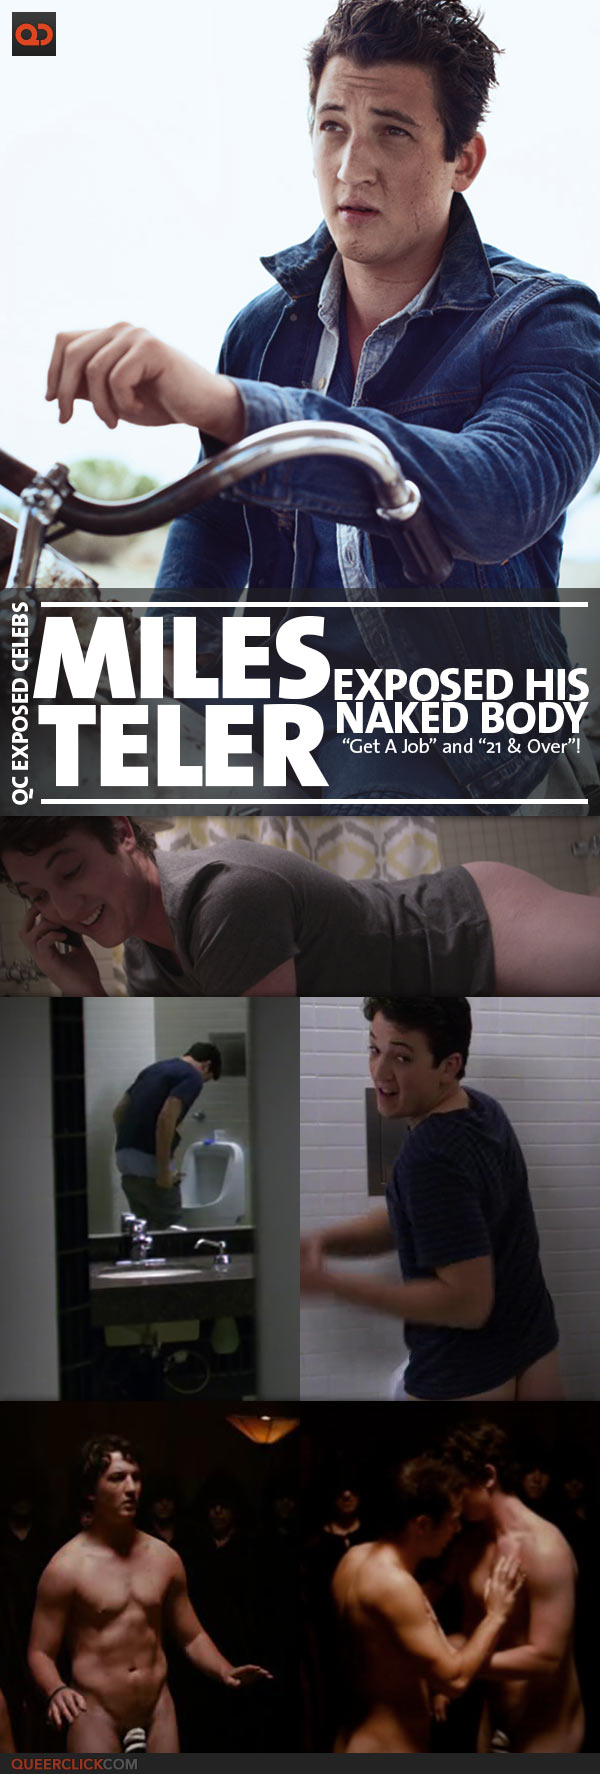 qc-miles_teller_naked_body_21_and_over_get_a_job-teaser